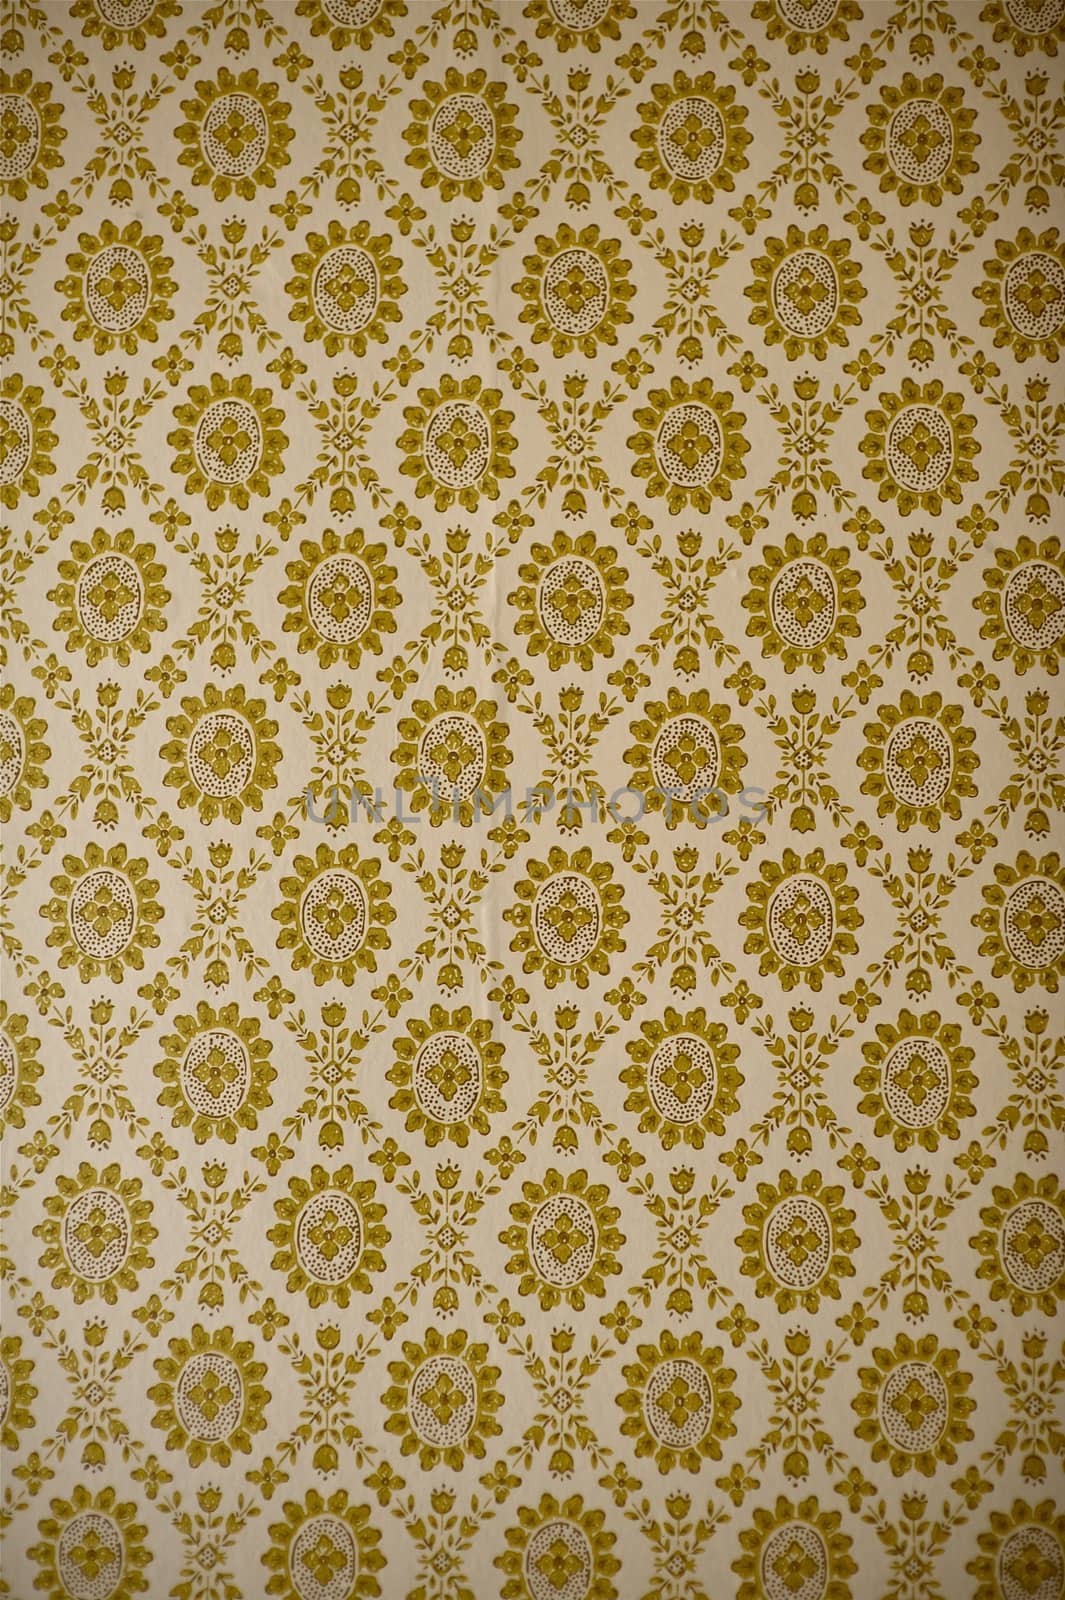 Vintage Wallpaper by welcomia